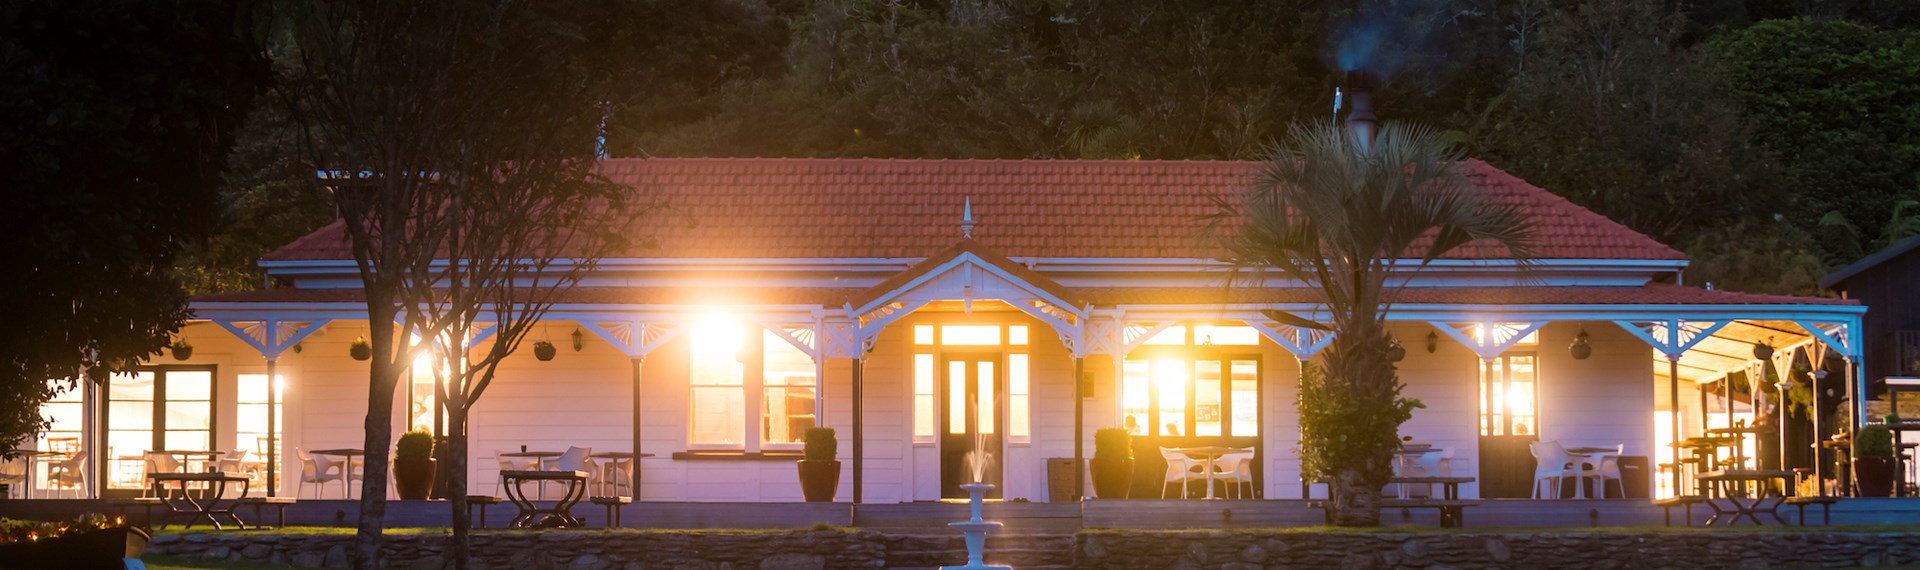 The front of historic Howden House at Furneaux Lodge showing the long verandah and orange tiled roof, in the Marlborough Sounds at the top of New Zealand's South Island.